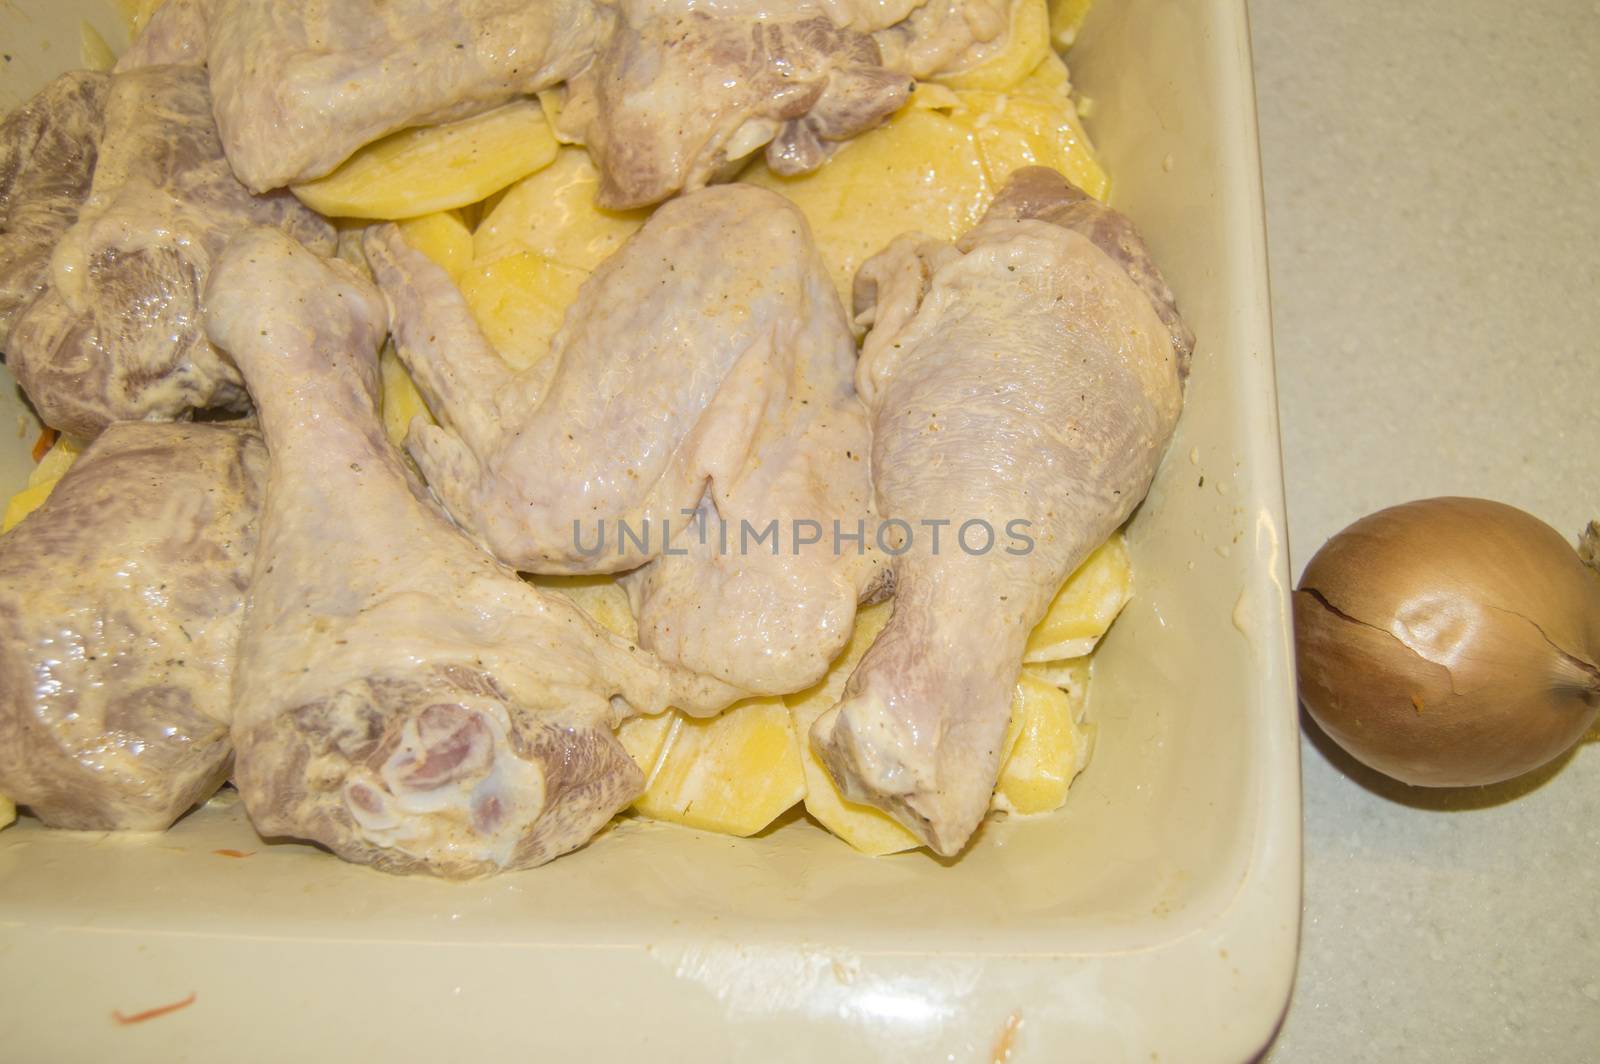 Pieces of raw chicken and sliced potatoes, marinated with mayonnaise and laid out in ceramic baking dish. Cooking holiday food for Christmas, Easter, Thanksgiving. concept of a family holiday dinner